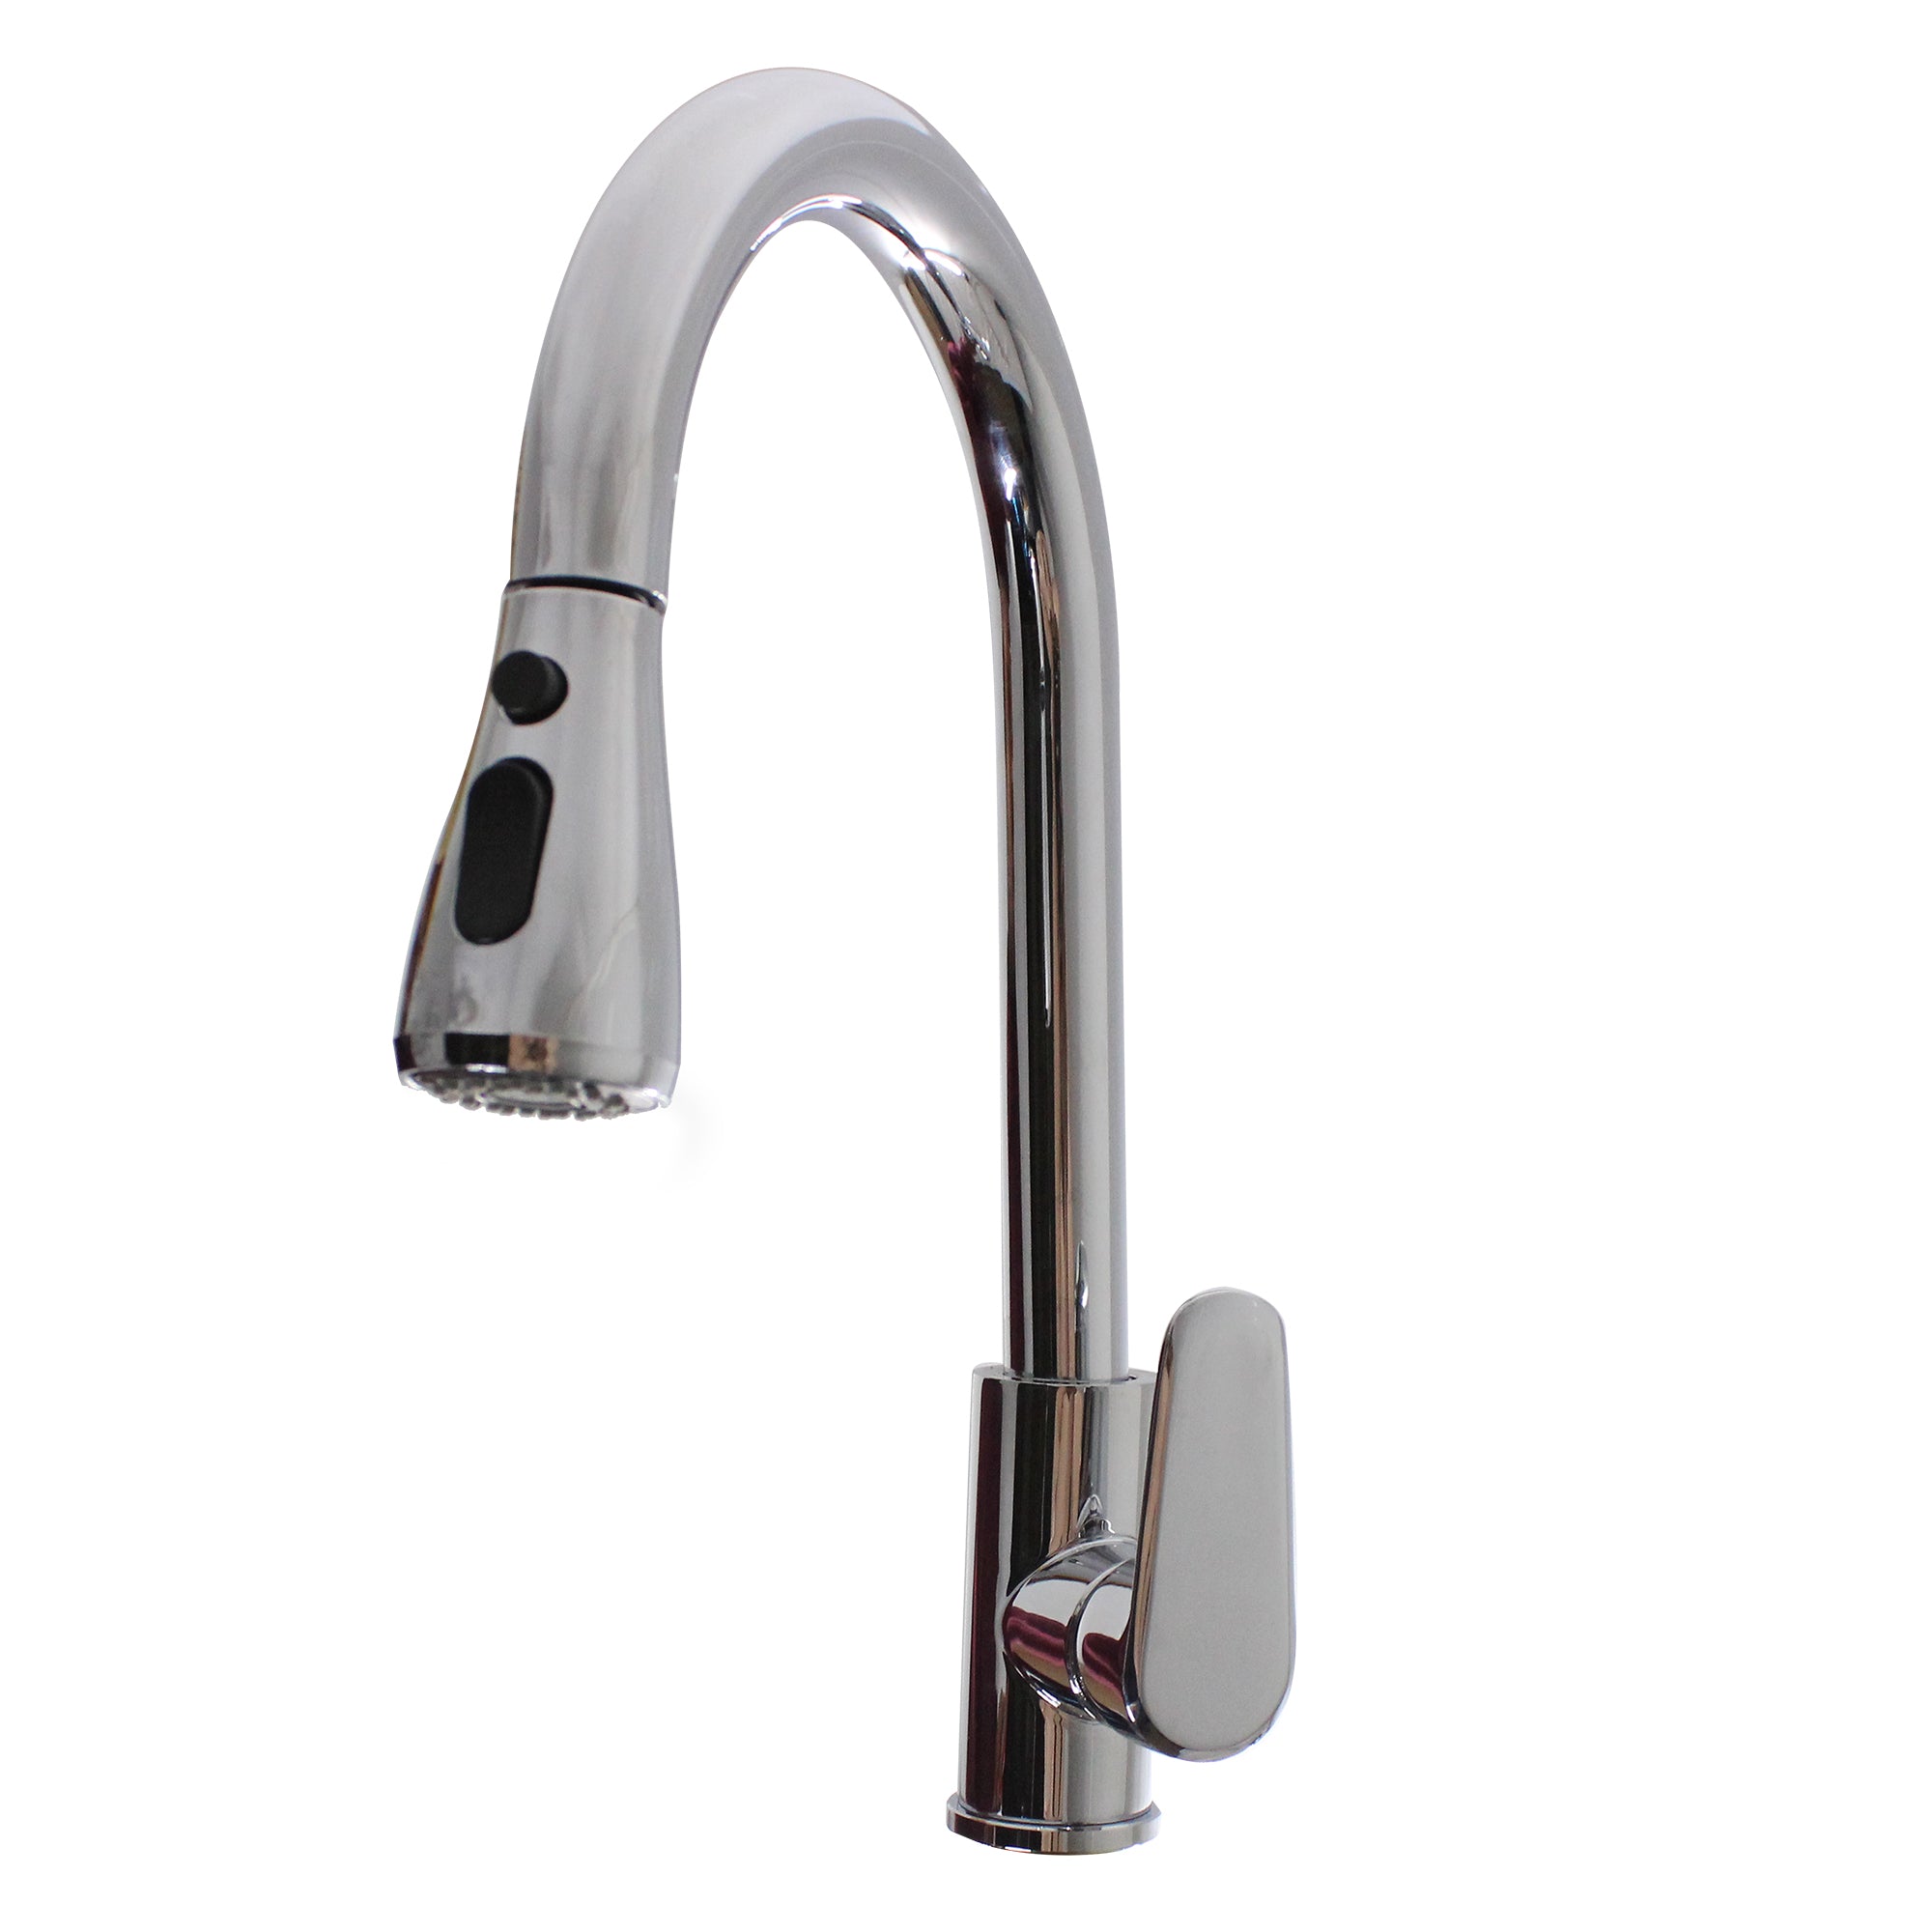 LMA Kitchen Tap Mixer with Self-Retracting Pullout Faucet 6833 R